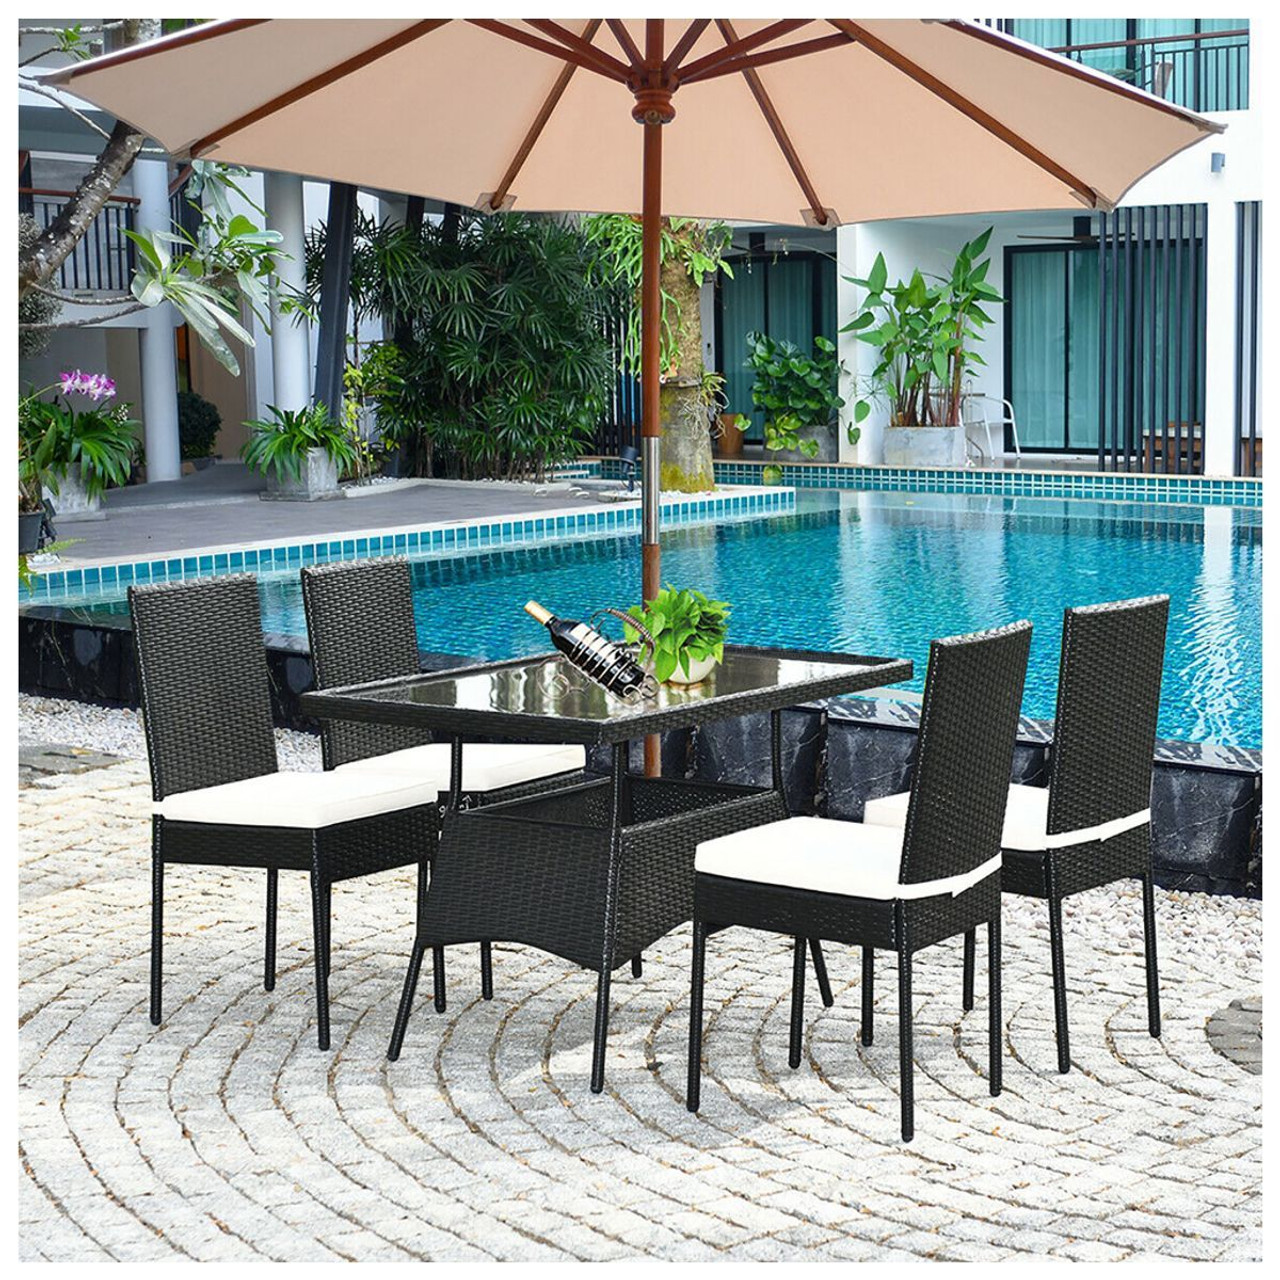 5-Piece Rattan Dining Set with Glass Table & High-Back Chair product image